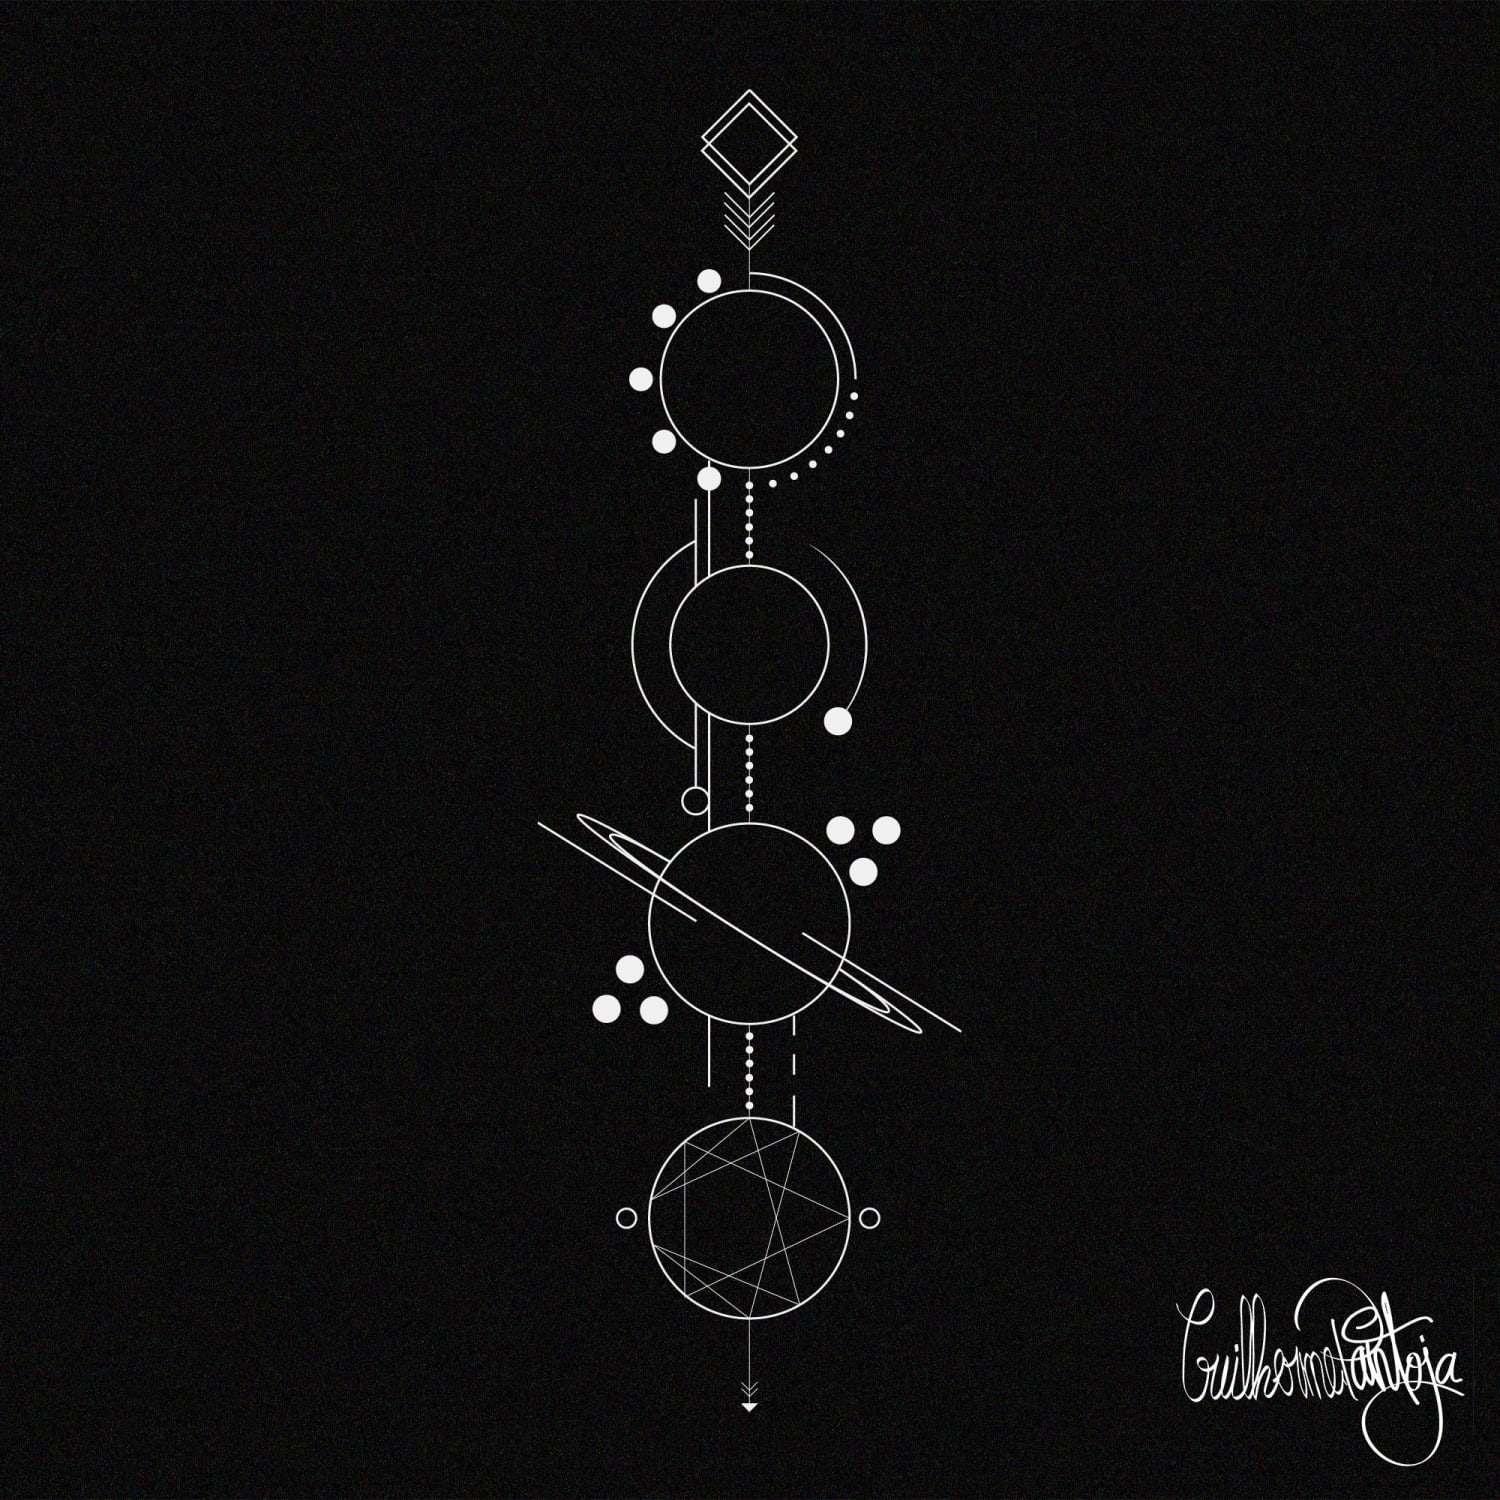 Little planets geometry, based on the "Space" album by sleeping at last, did it for a Tattoo Design.